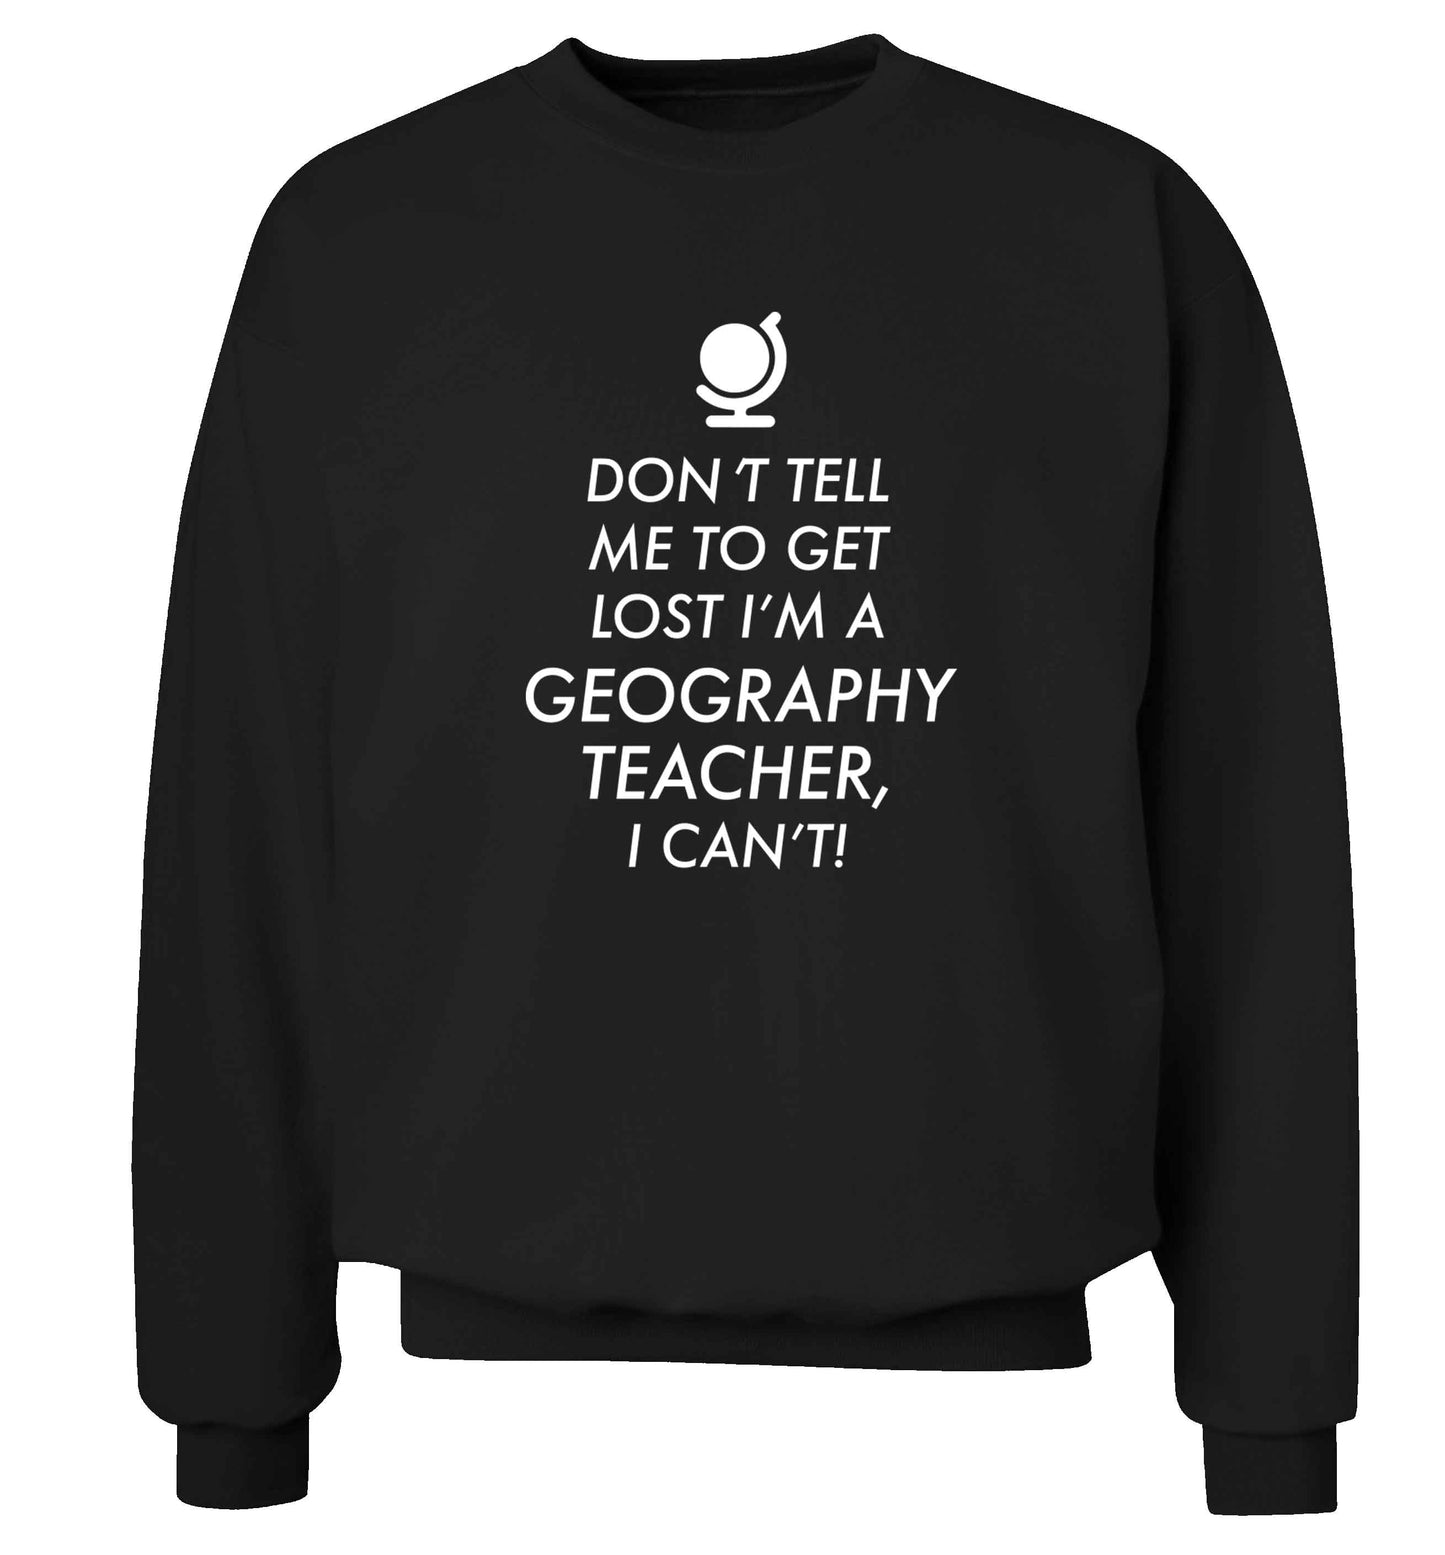 Don't tell me to get lost I'm a geography teacher, I can't Adult's unisex black Sweater 2XL